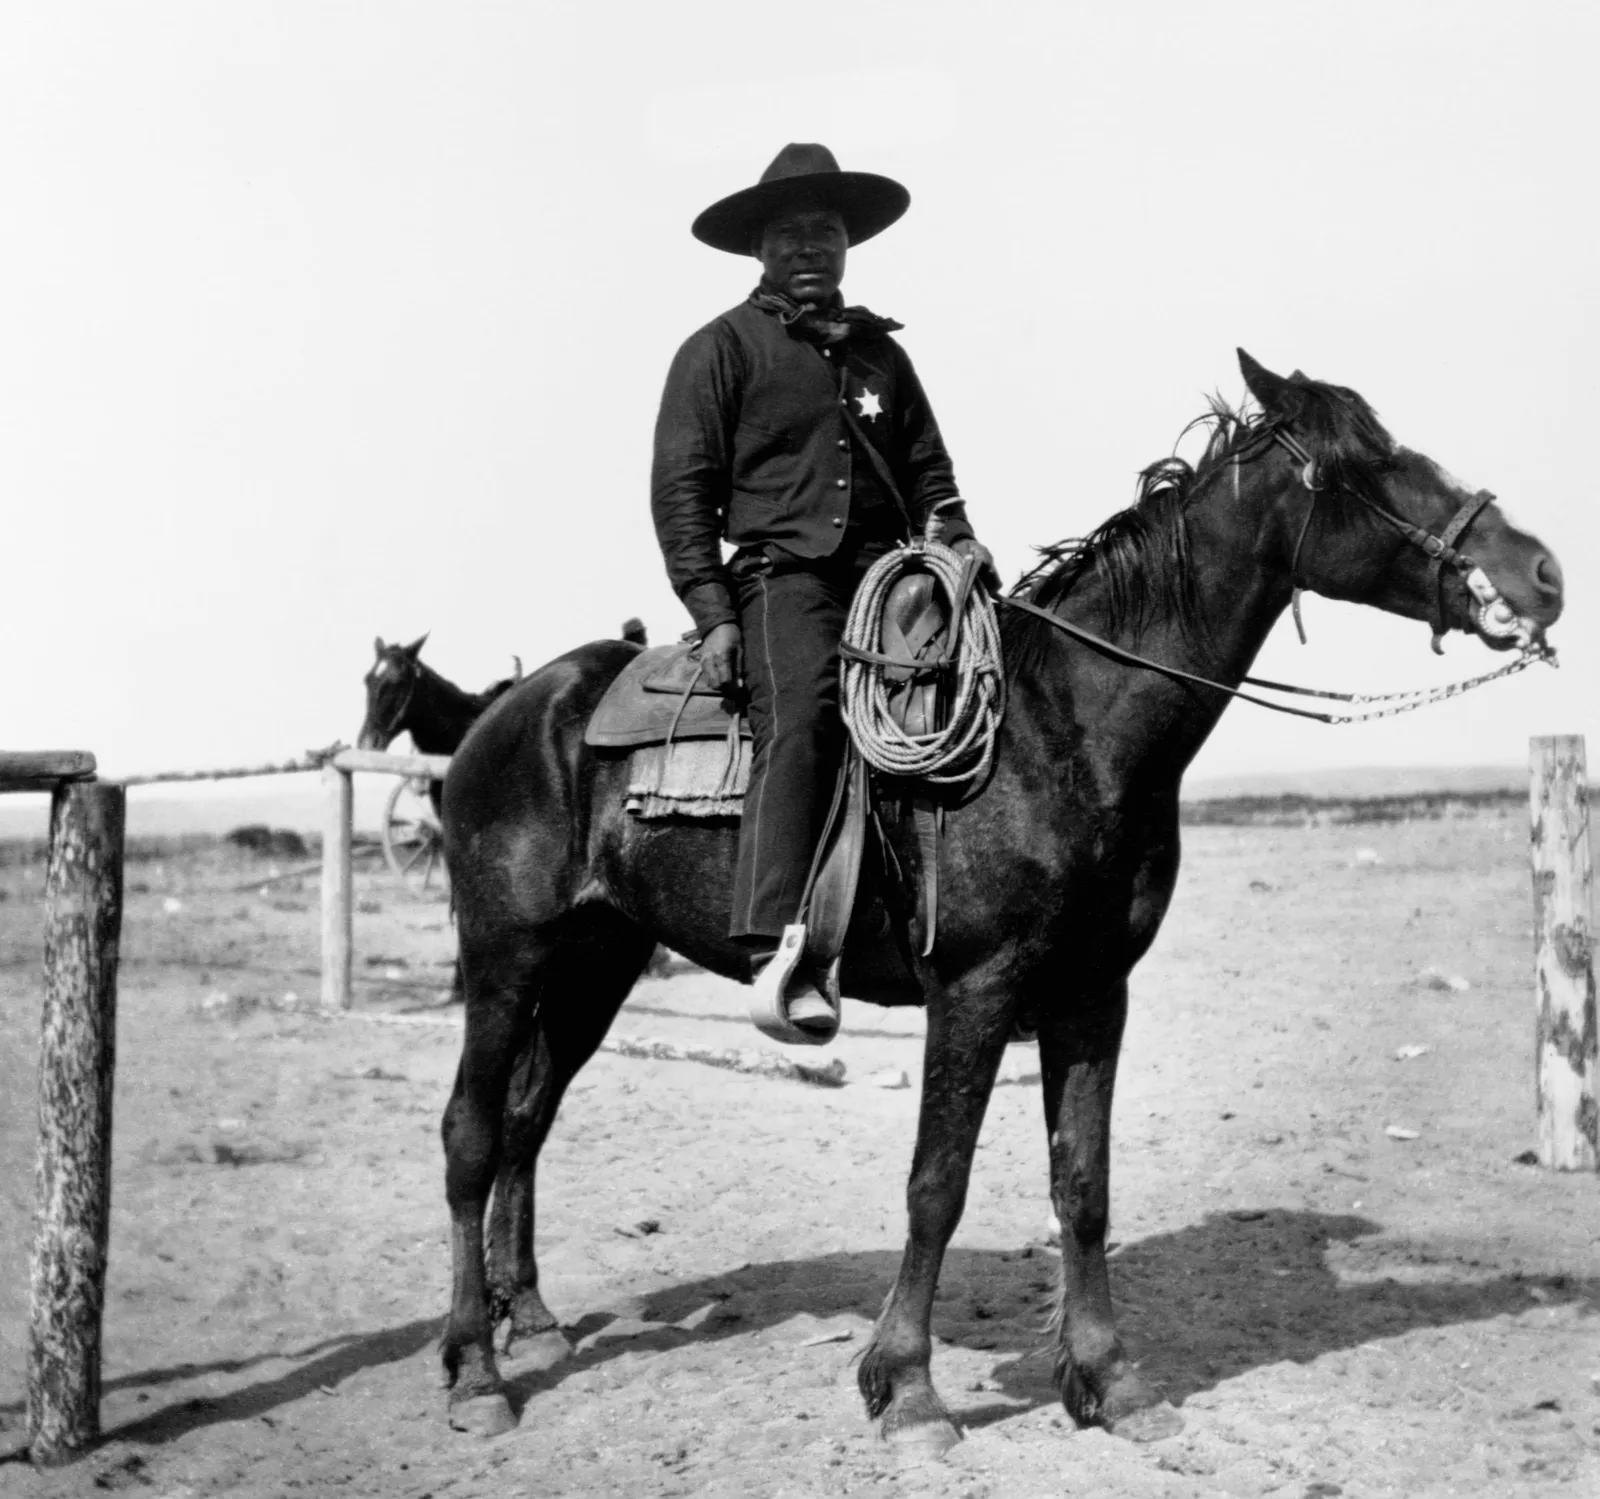 The Lesser-Known History of African-American Cowboys